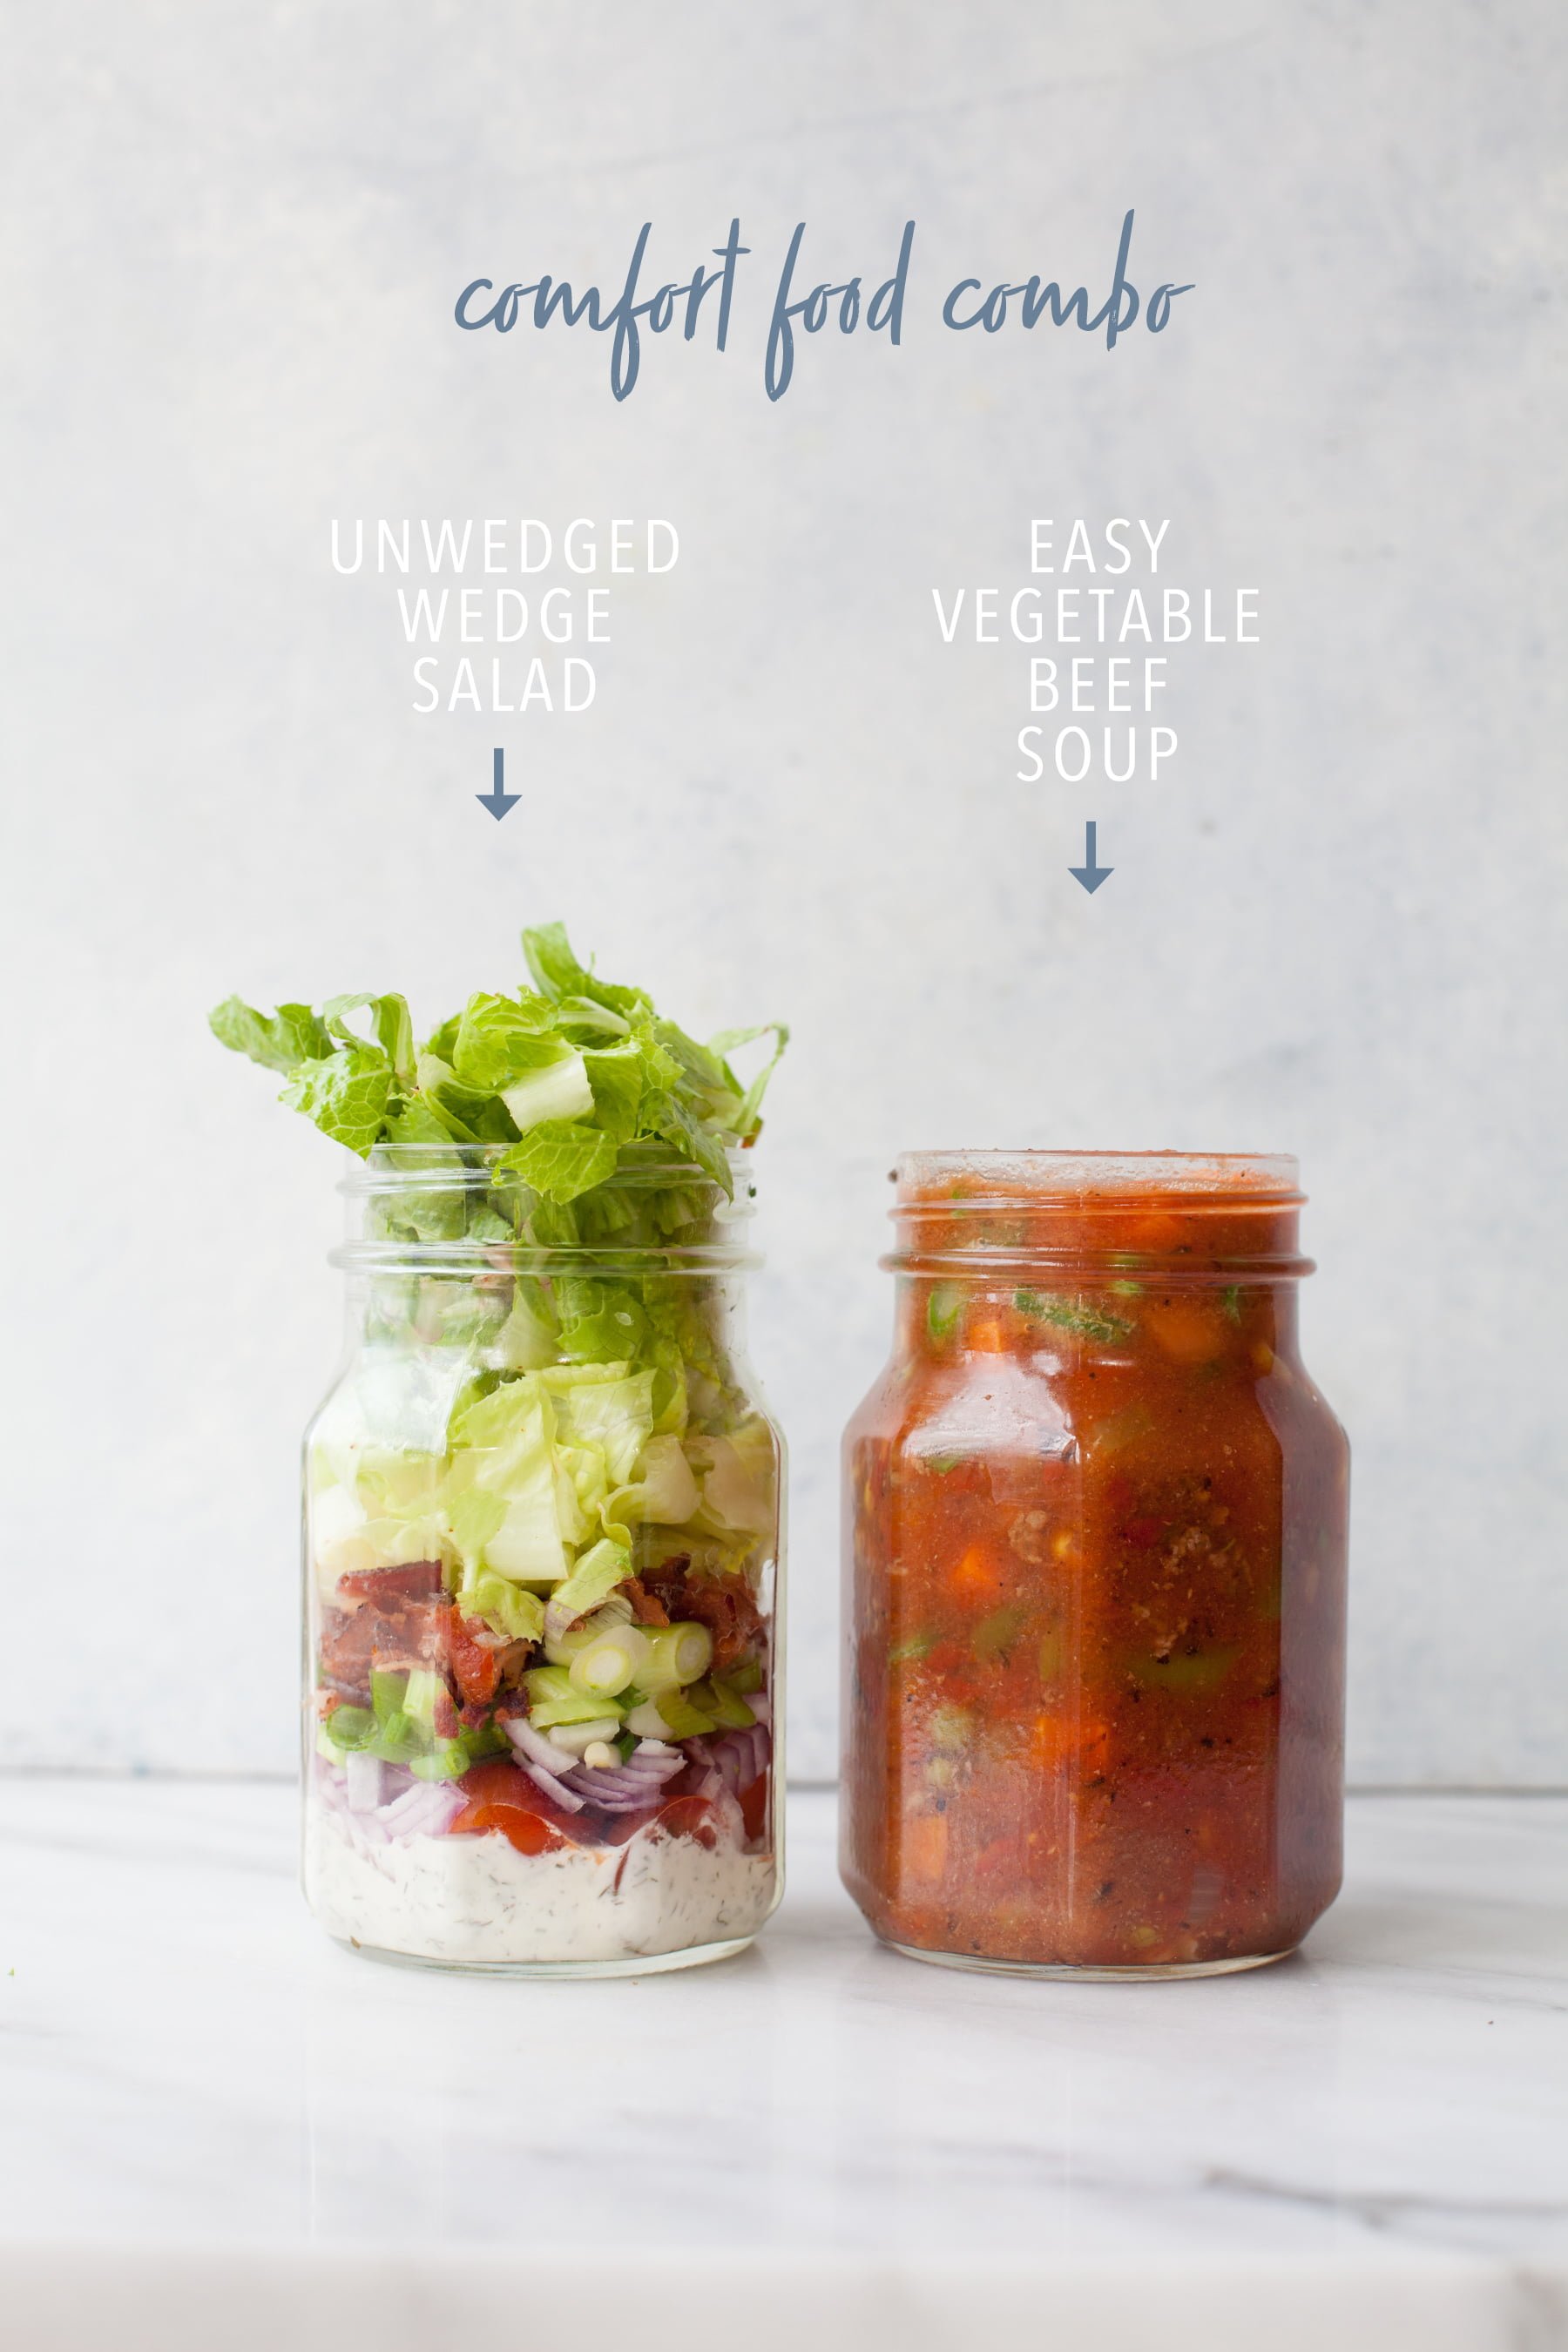 Two canning jars on gray background, one with salad and one with soup